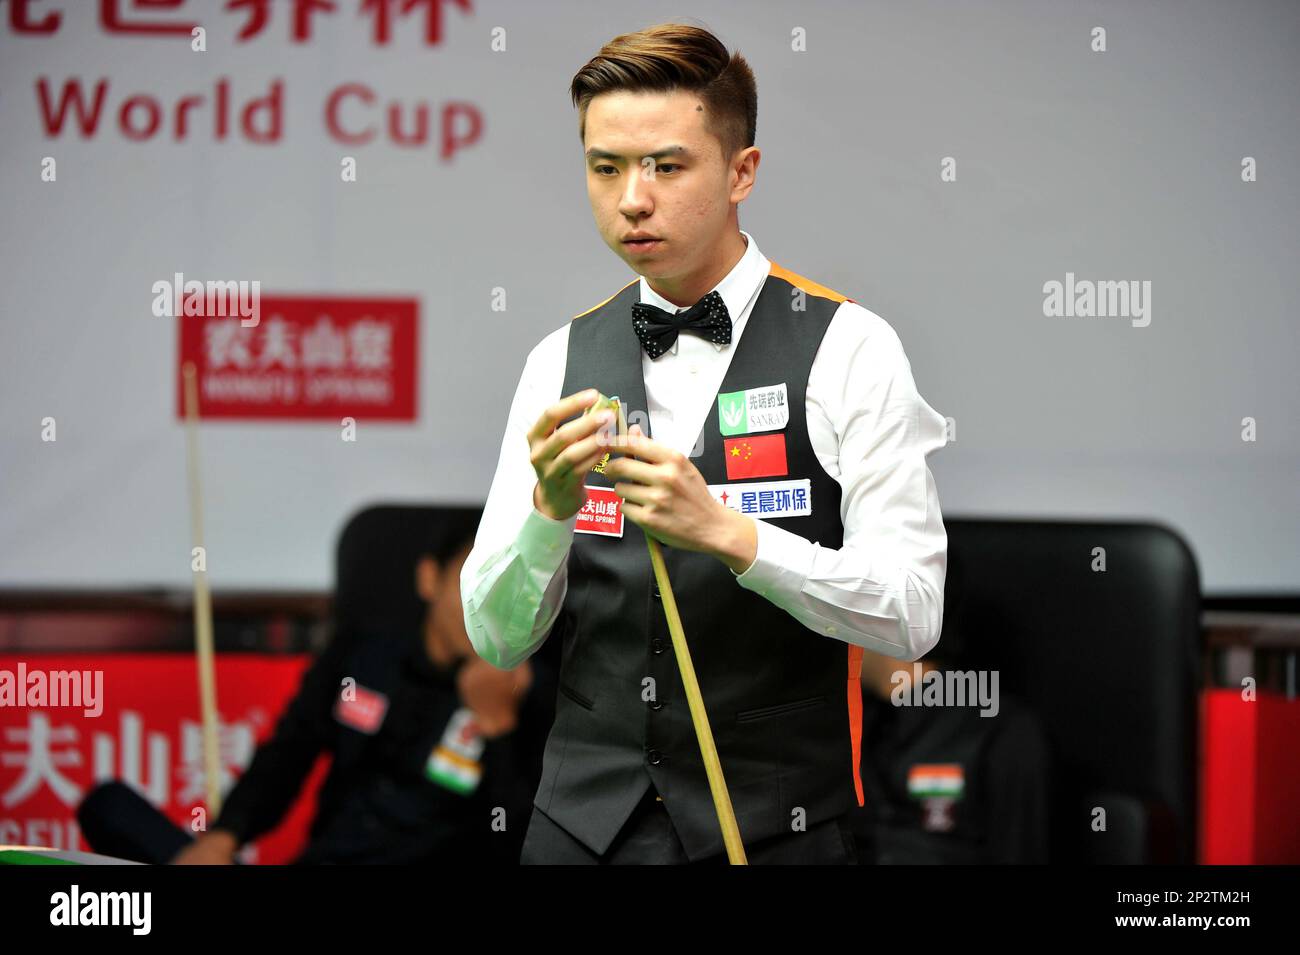 Xiao Guodong of China chalks his cue as he considers a shot against the Indian player during their first round match of the 2015 Snooker World Cup in Wuxi city, east Chinas